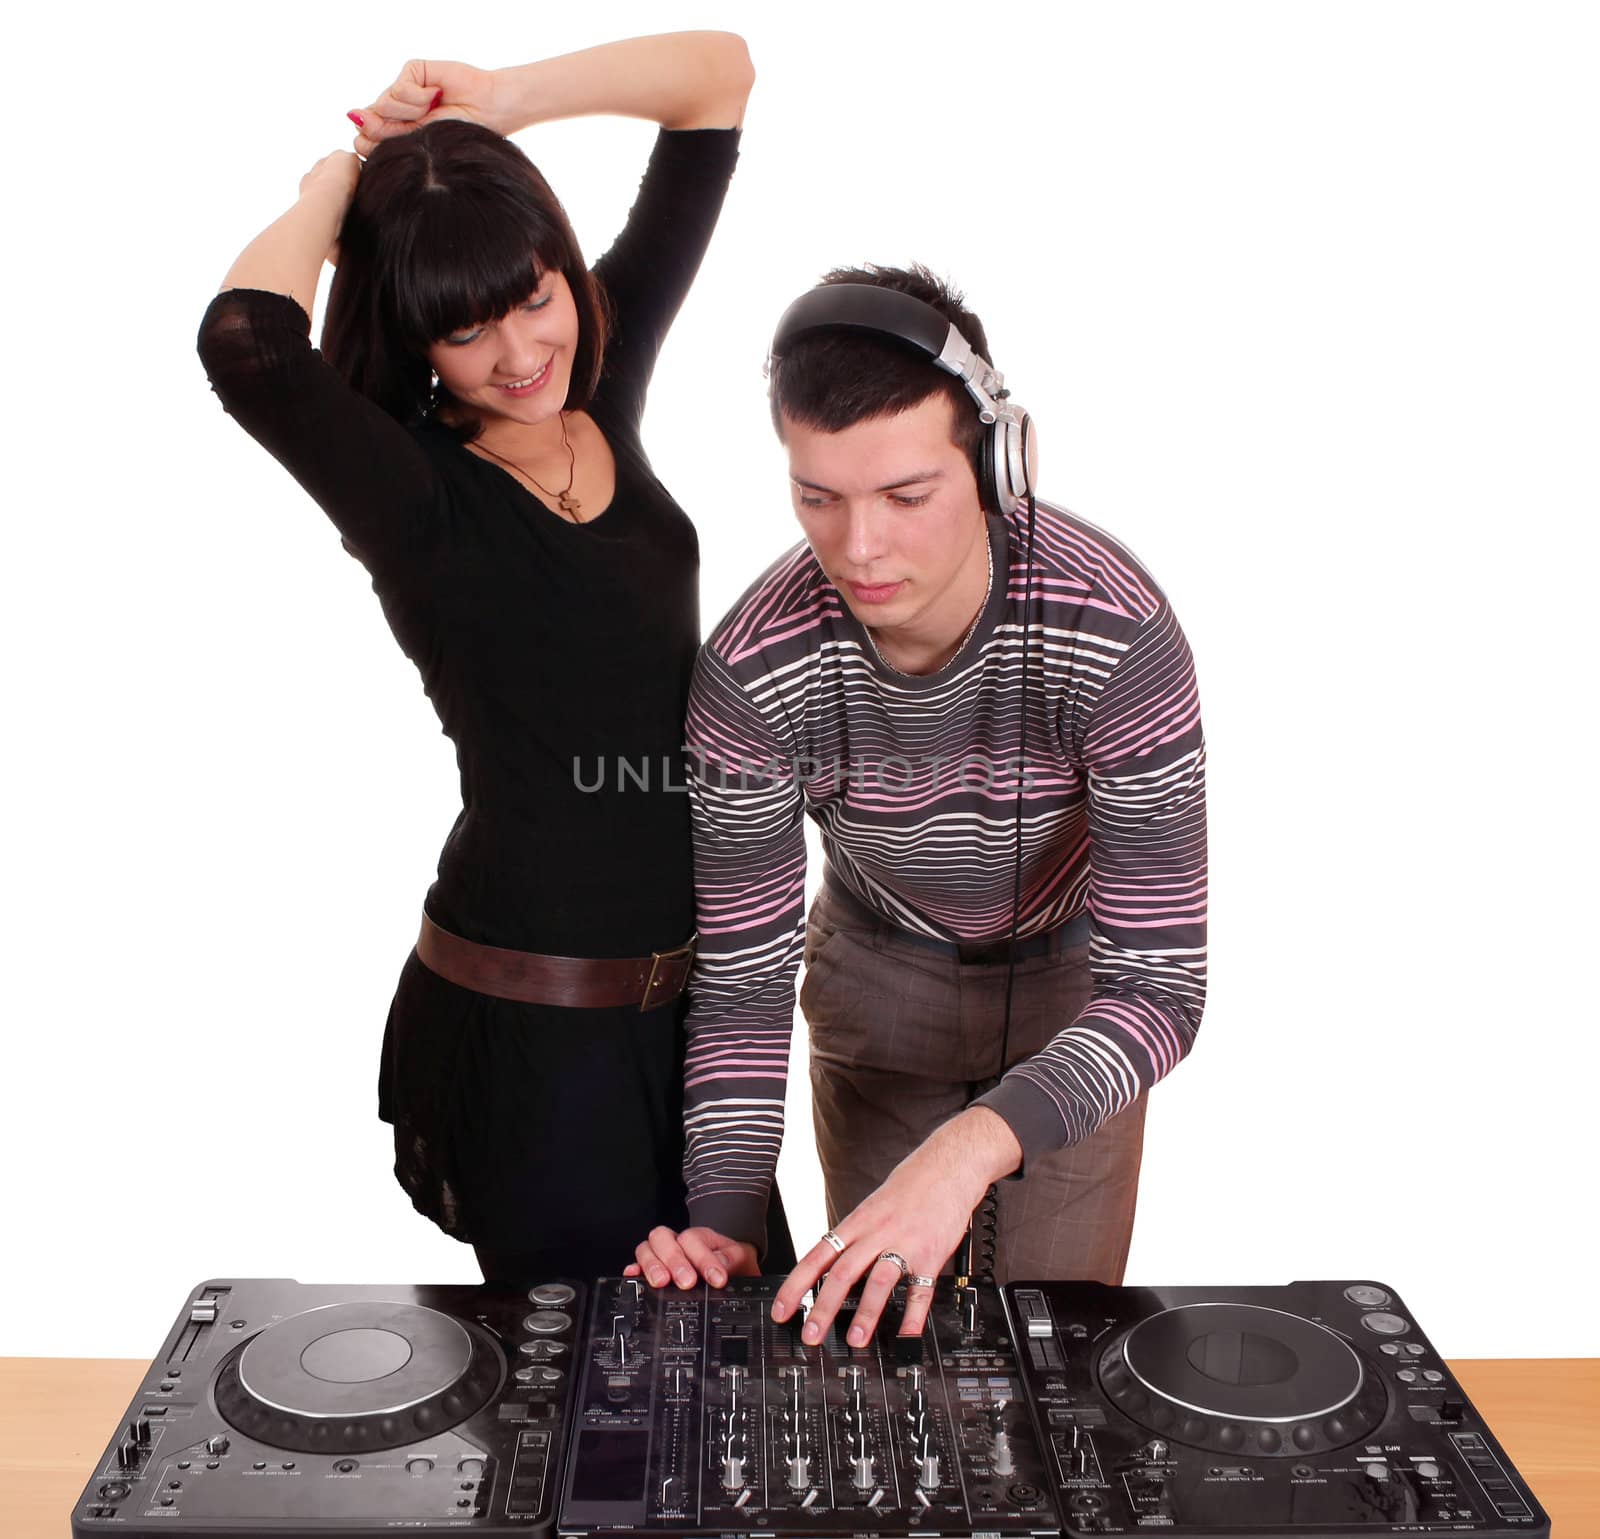 dj and beautiful girl play music and dance by goce